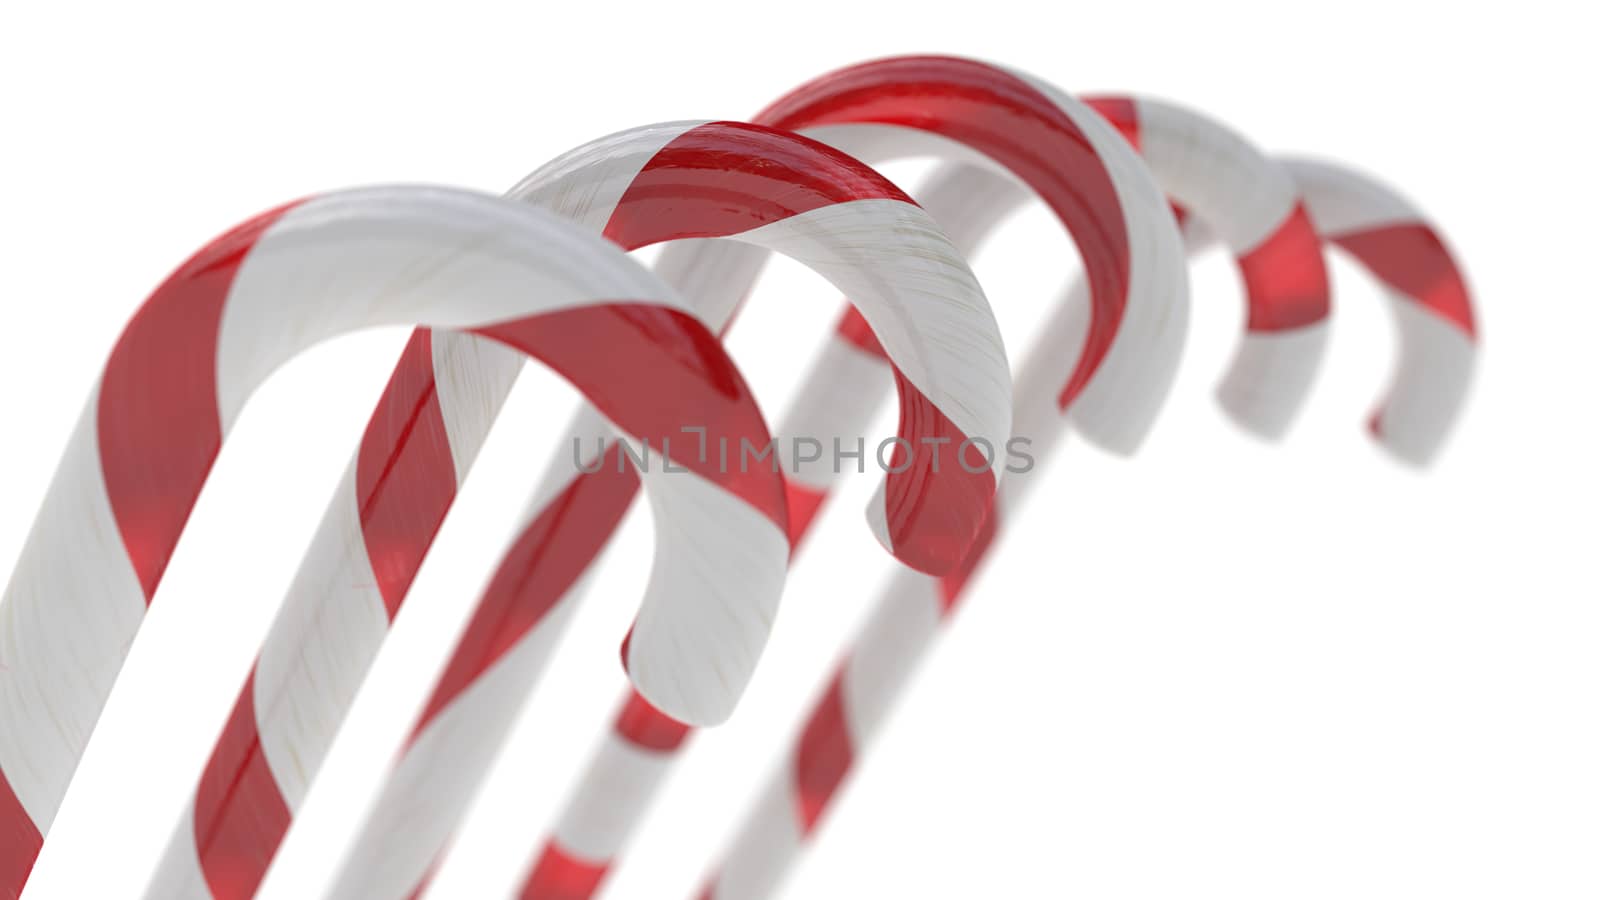 Candy Canes by Barbraford